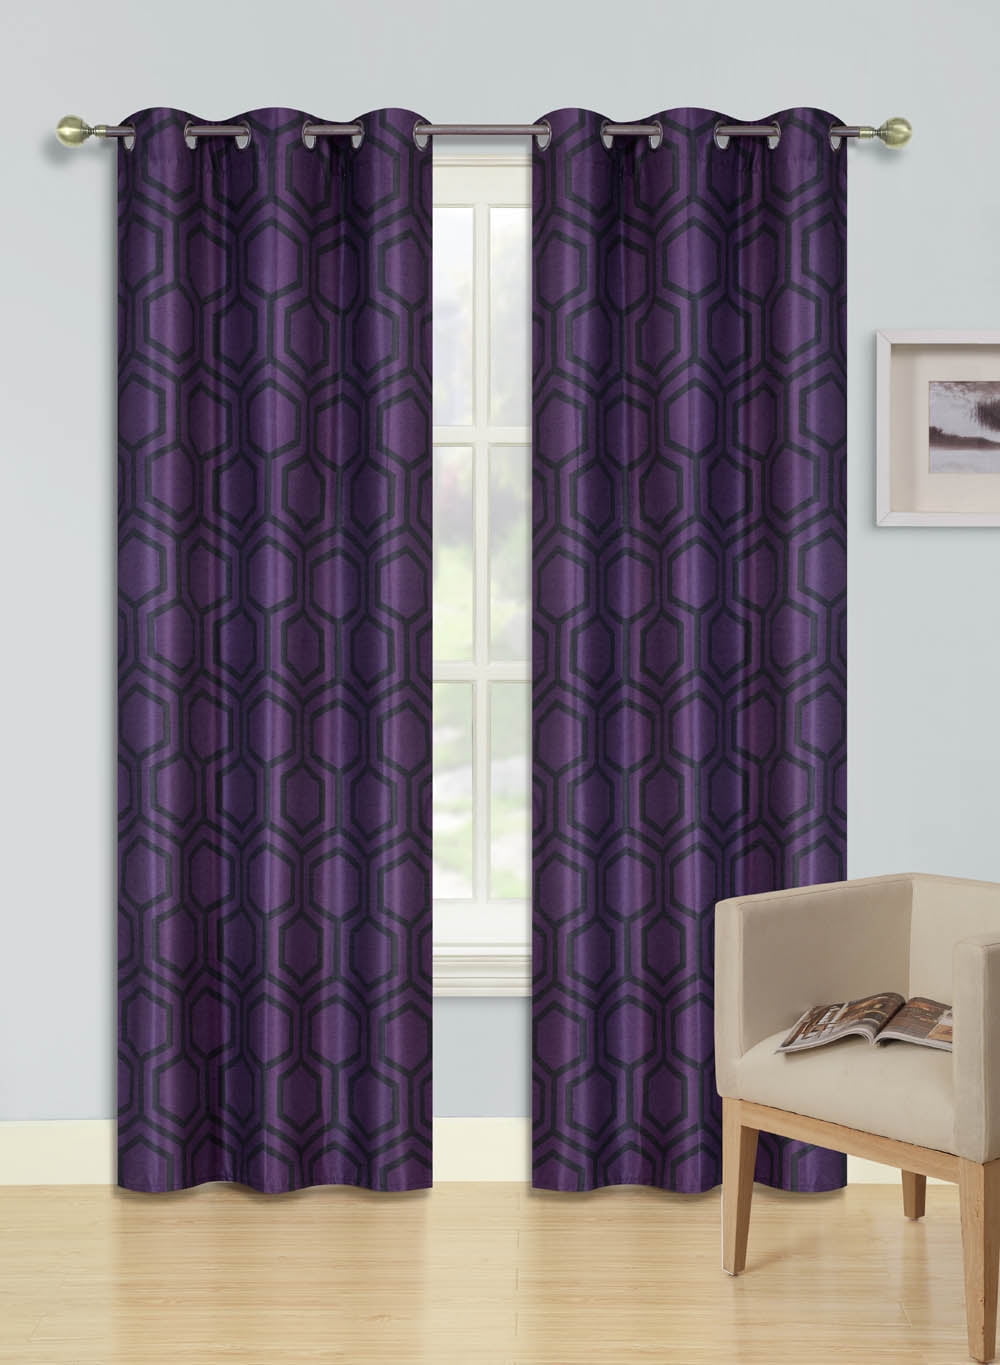 NEW 2 PRINTED SILVER GROMMET PANELS LINED BLACKOUT WINDOW CURTAIN ALMA BLACK 